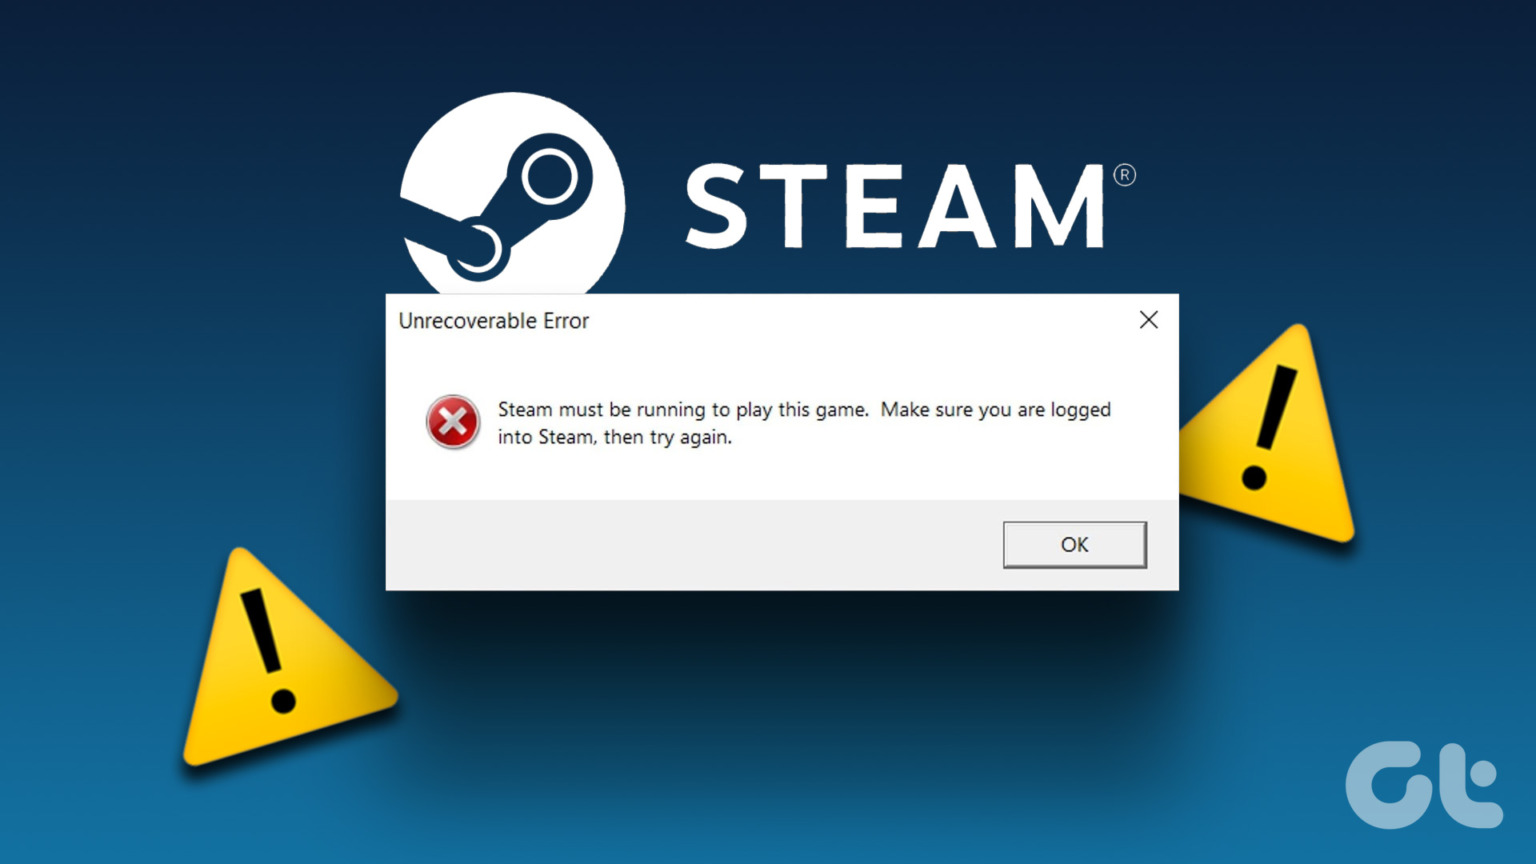 Fatal error online session interface missing please make sure steam is running